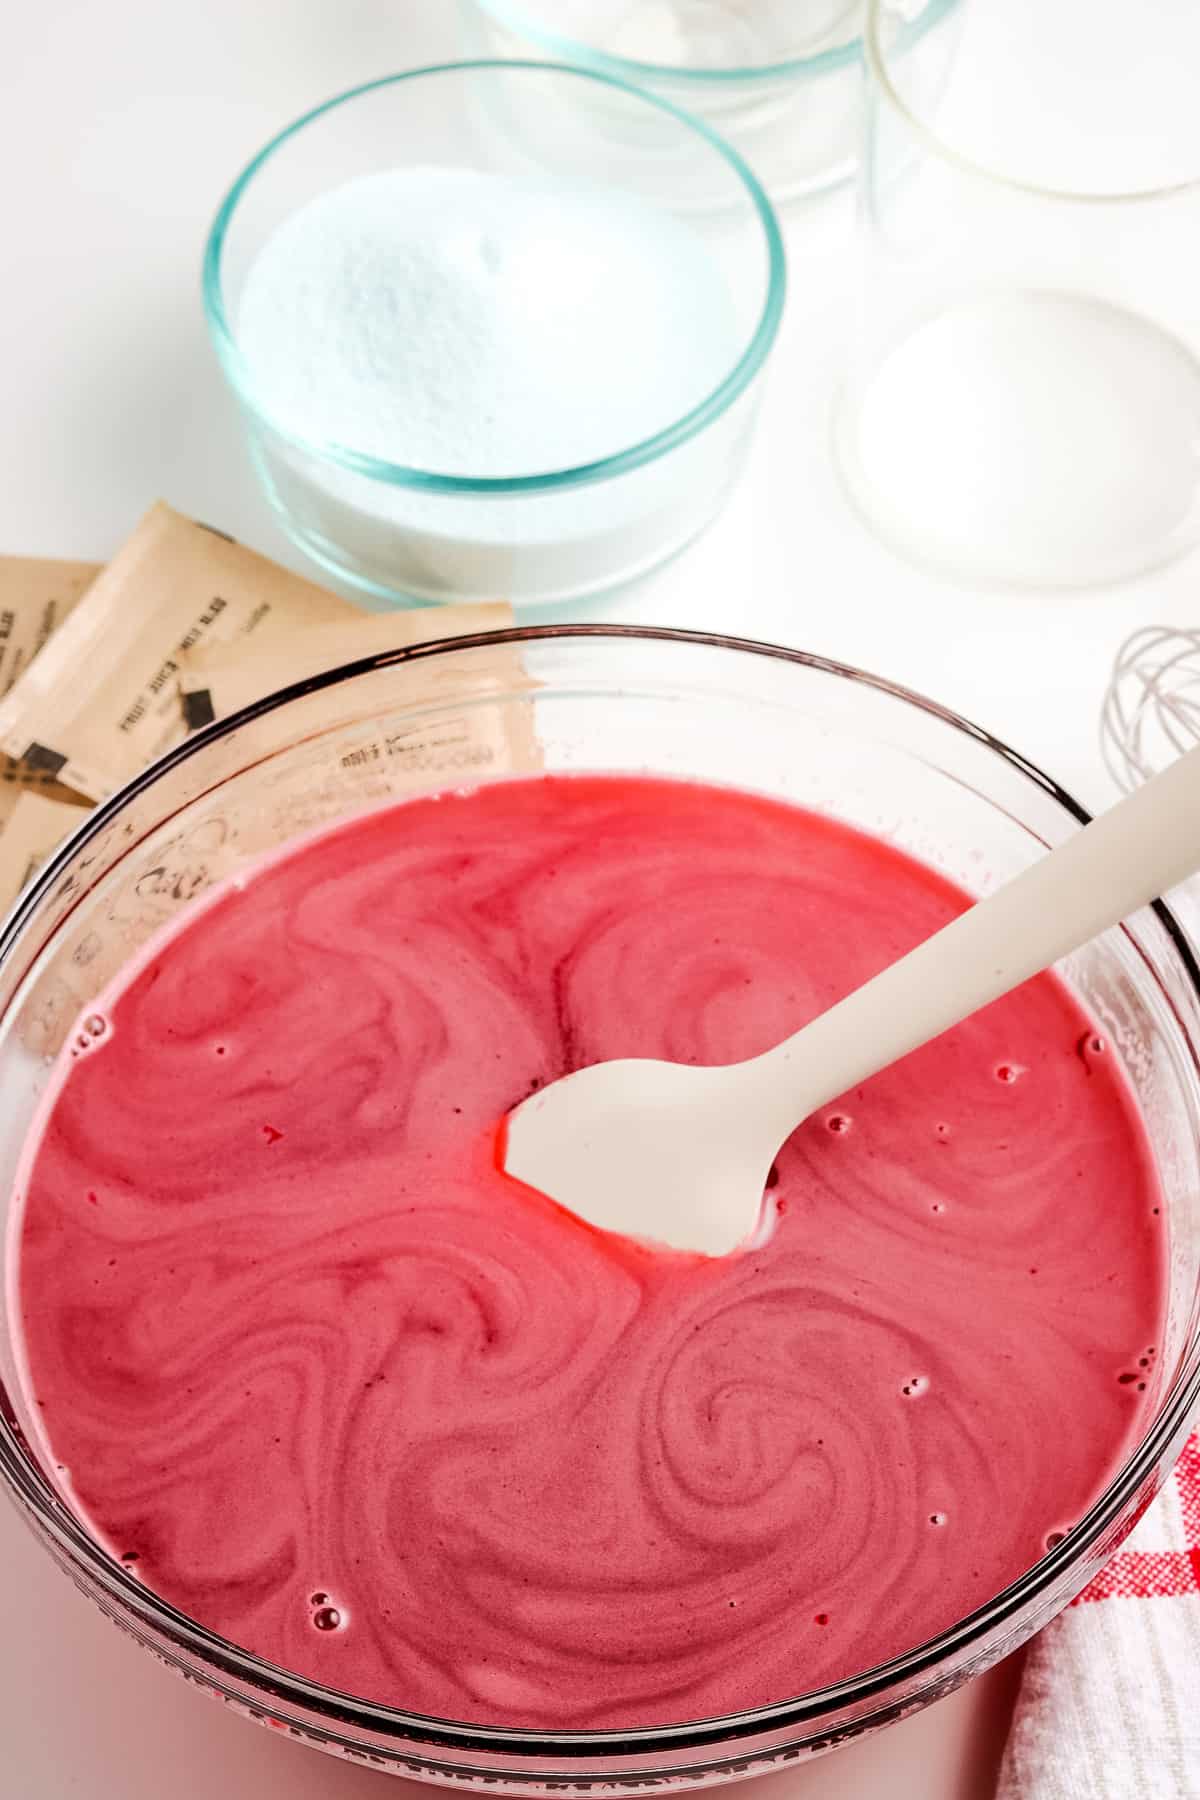 Pour in the boiling water and whisk until the jello is disolved